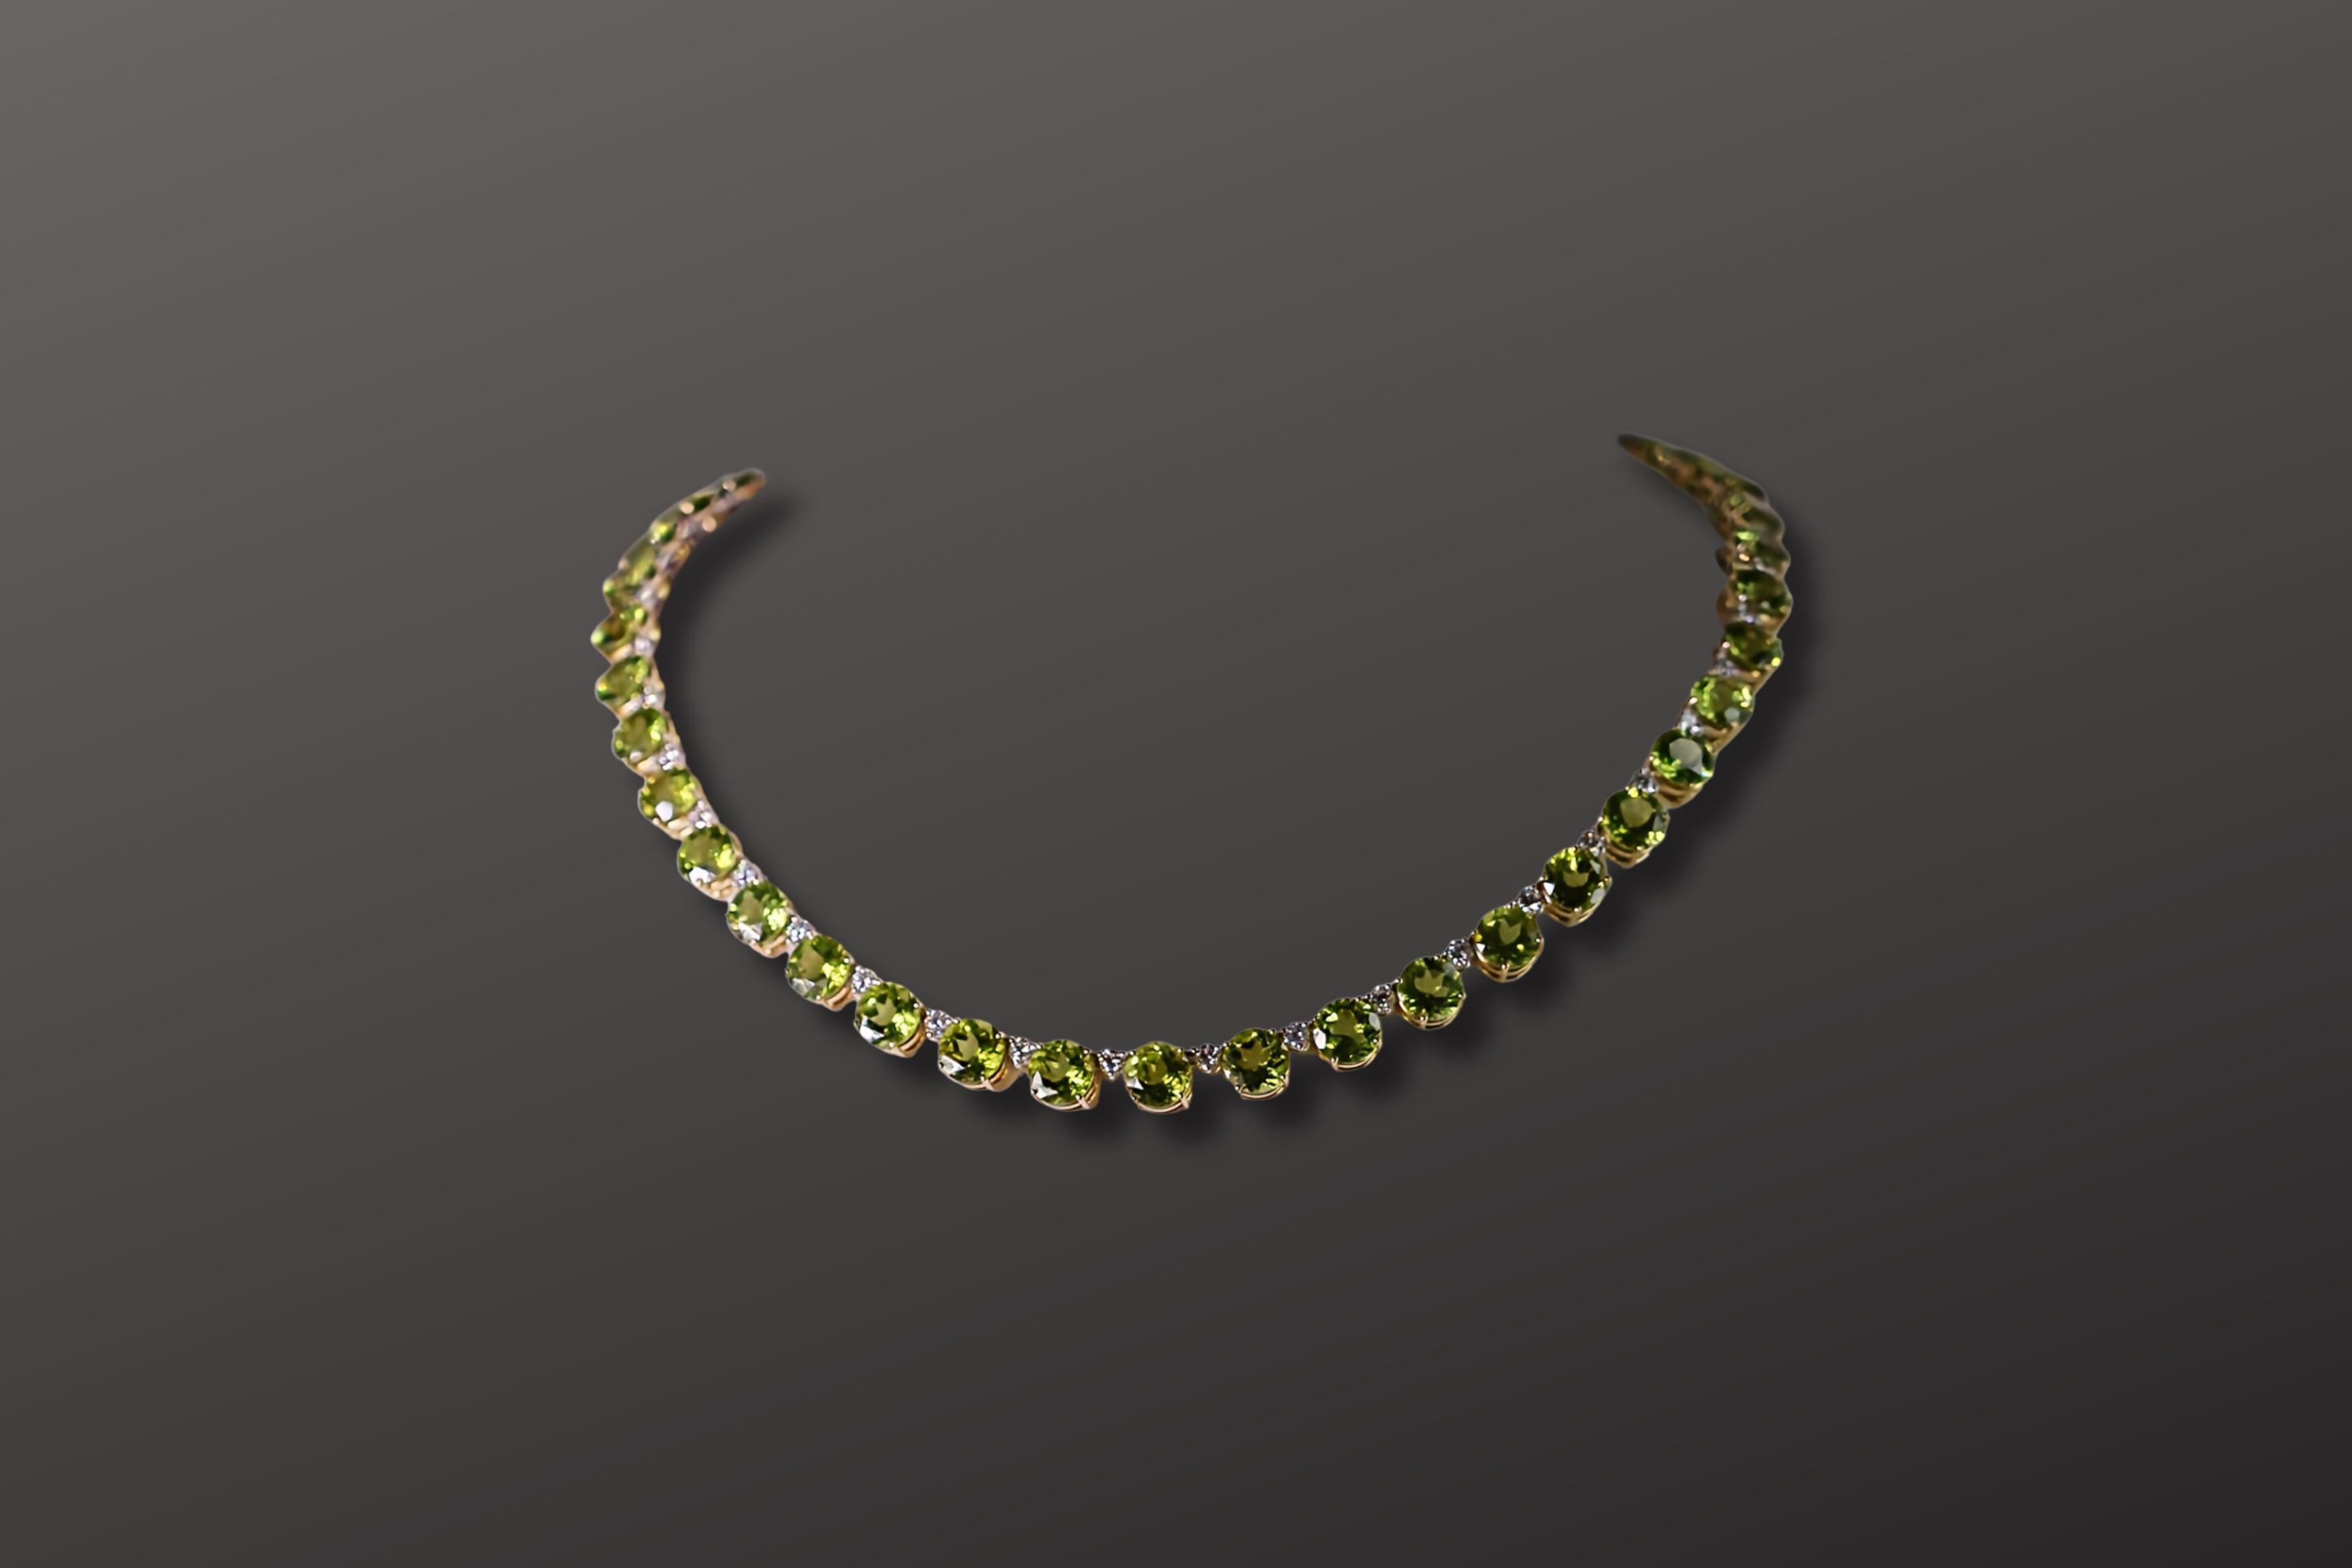 The art of Italian goldsmithing radiantly comes to the fore in this necklace. Here, yellow gold and white gold meld in a luminous dance, accentuated by twinkling diamonds and deep green peridots. Each peridot, uniformly 7mm in diameter, is